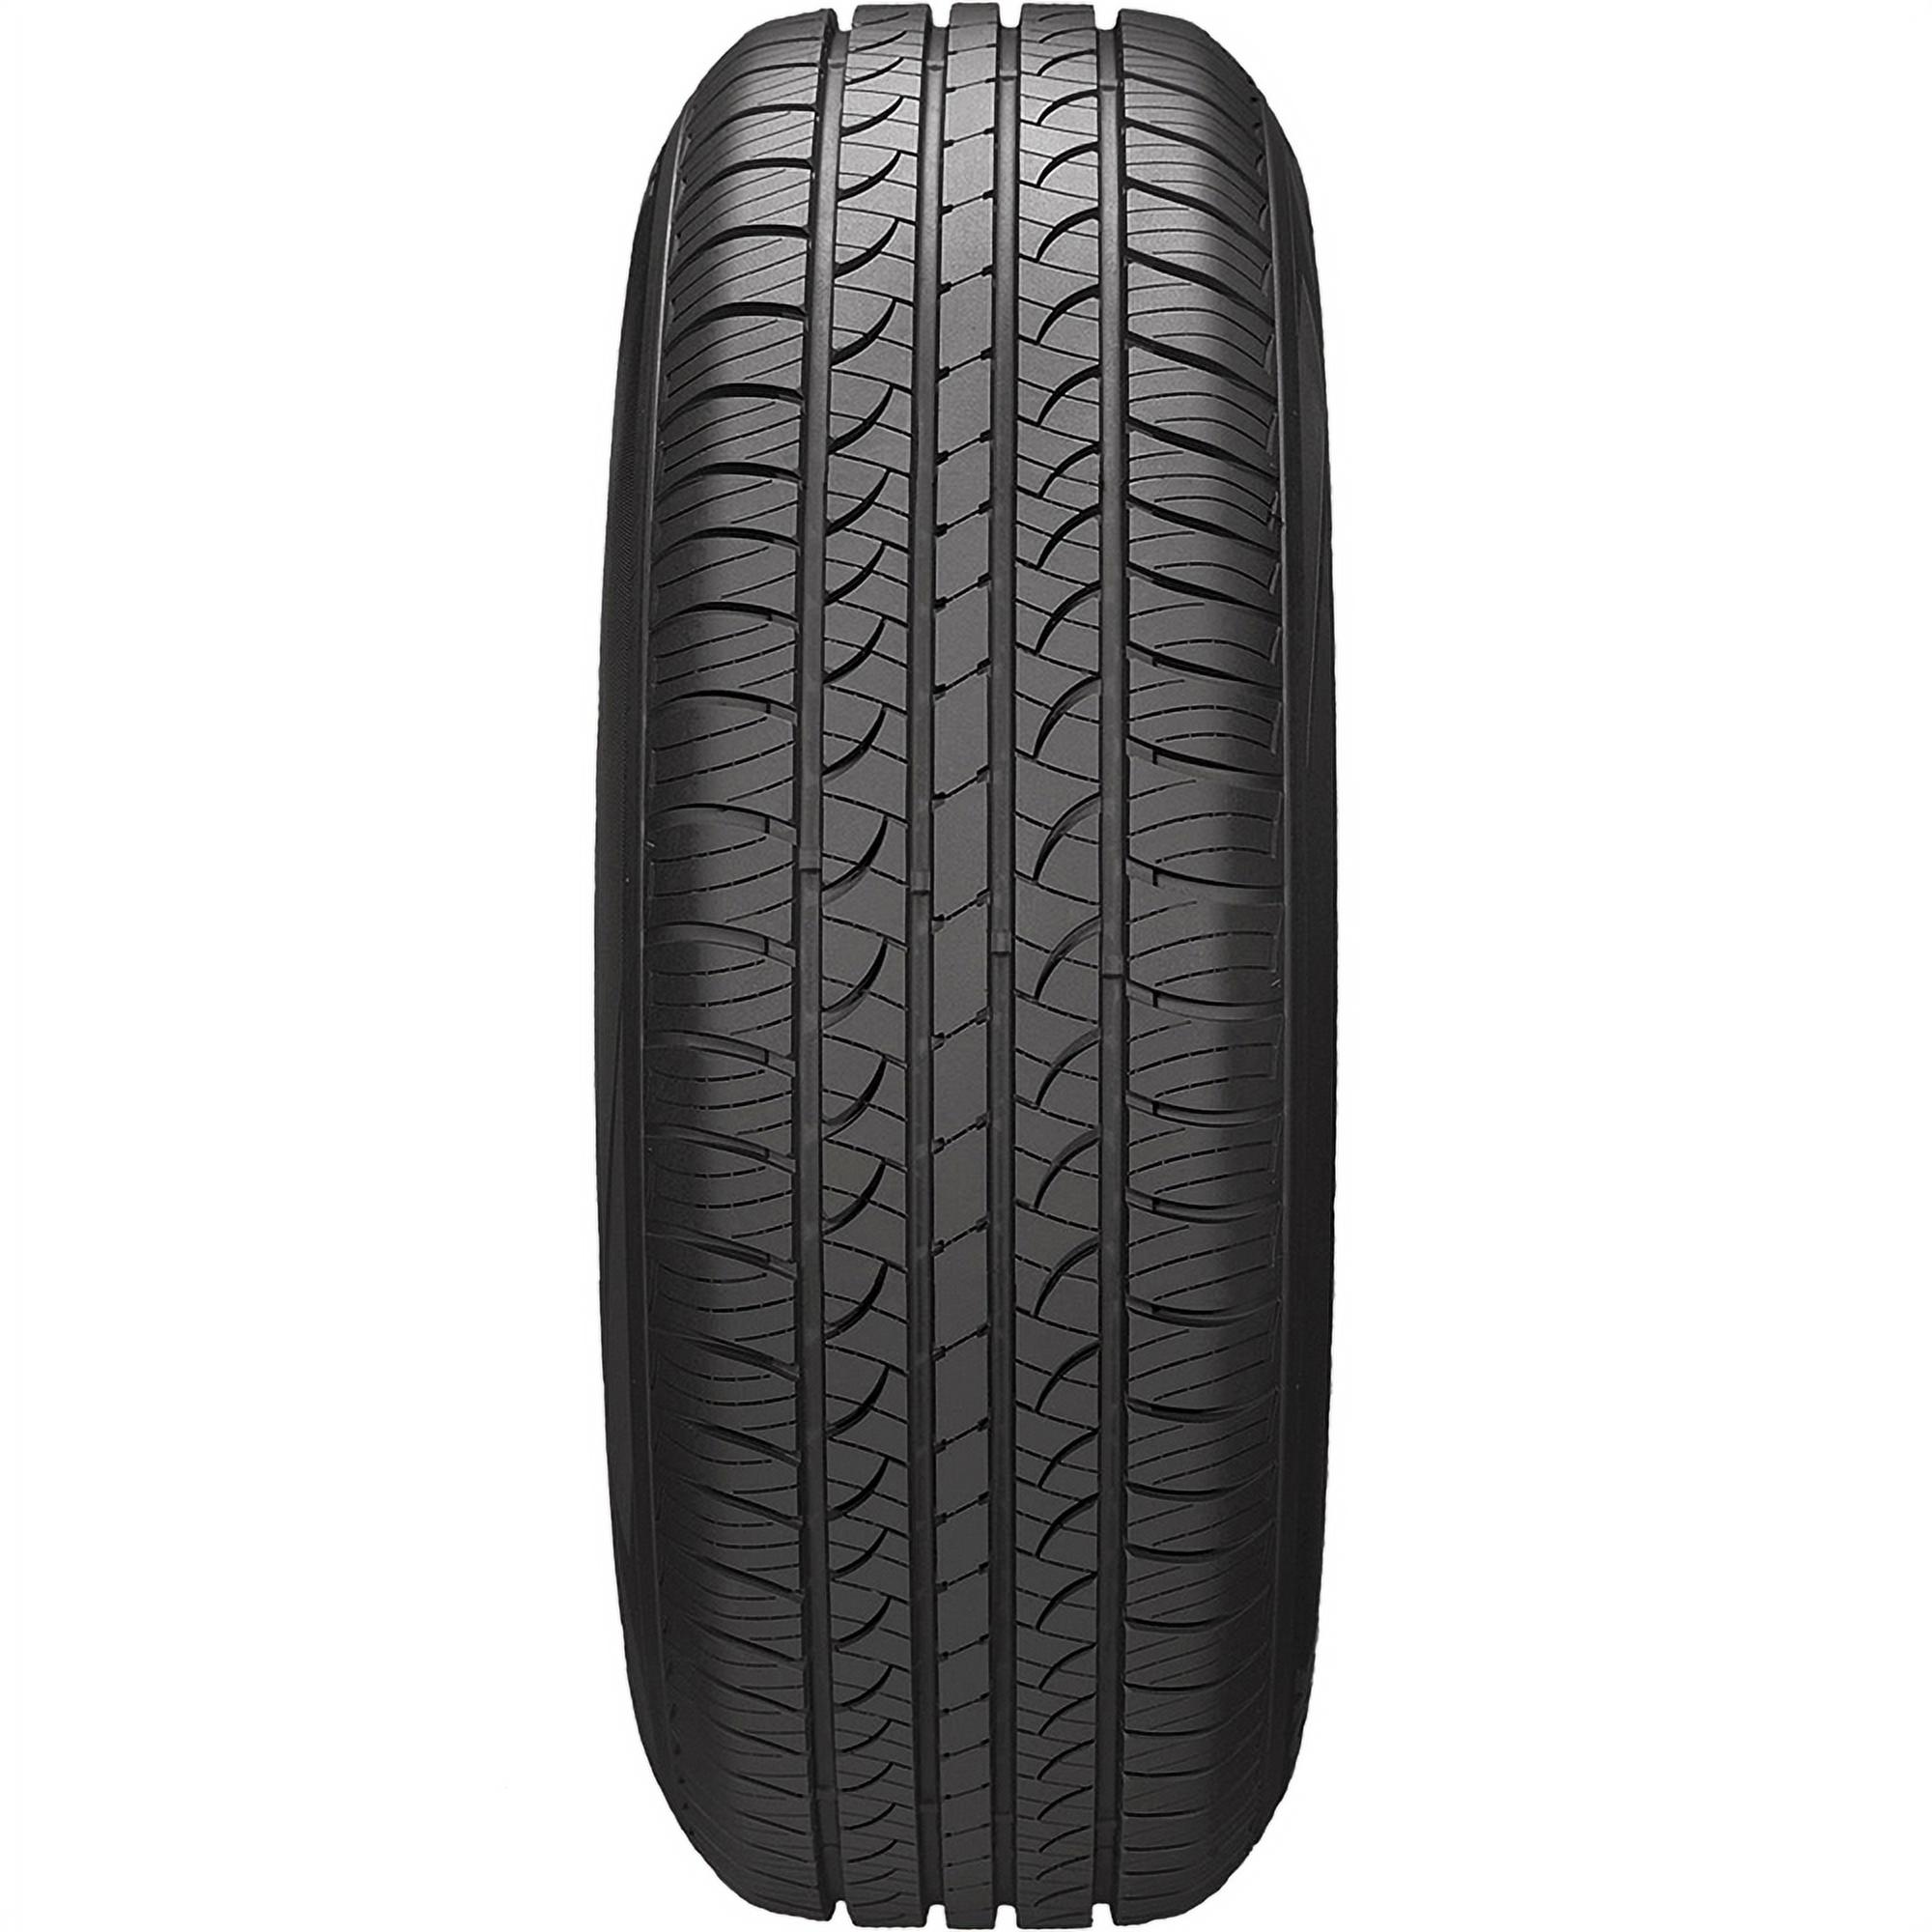 Hankook Optimo (H724) 225/70R15 100 T Tire Fits: 2005 Ford Escape XLT, 2000 Jeep Wrangler Sahara - image 3 of 3